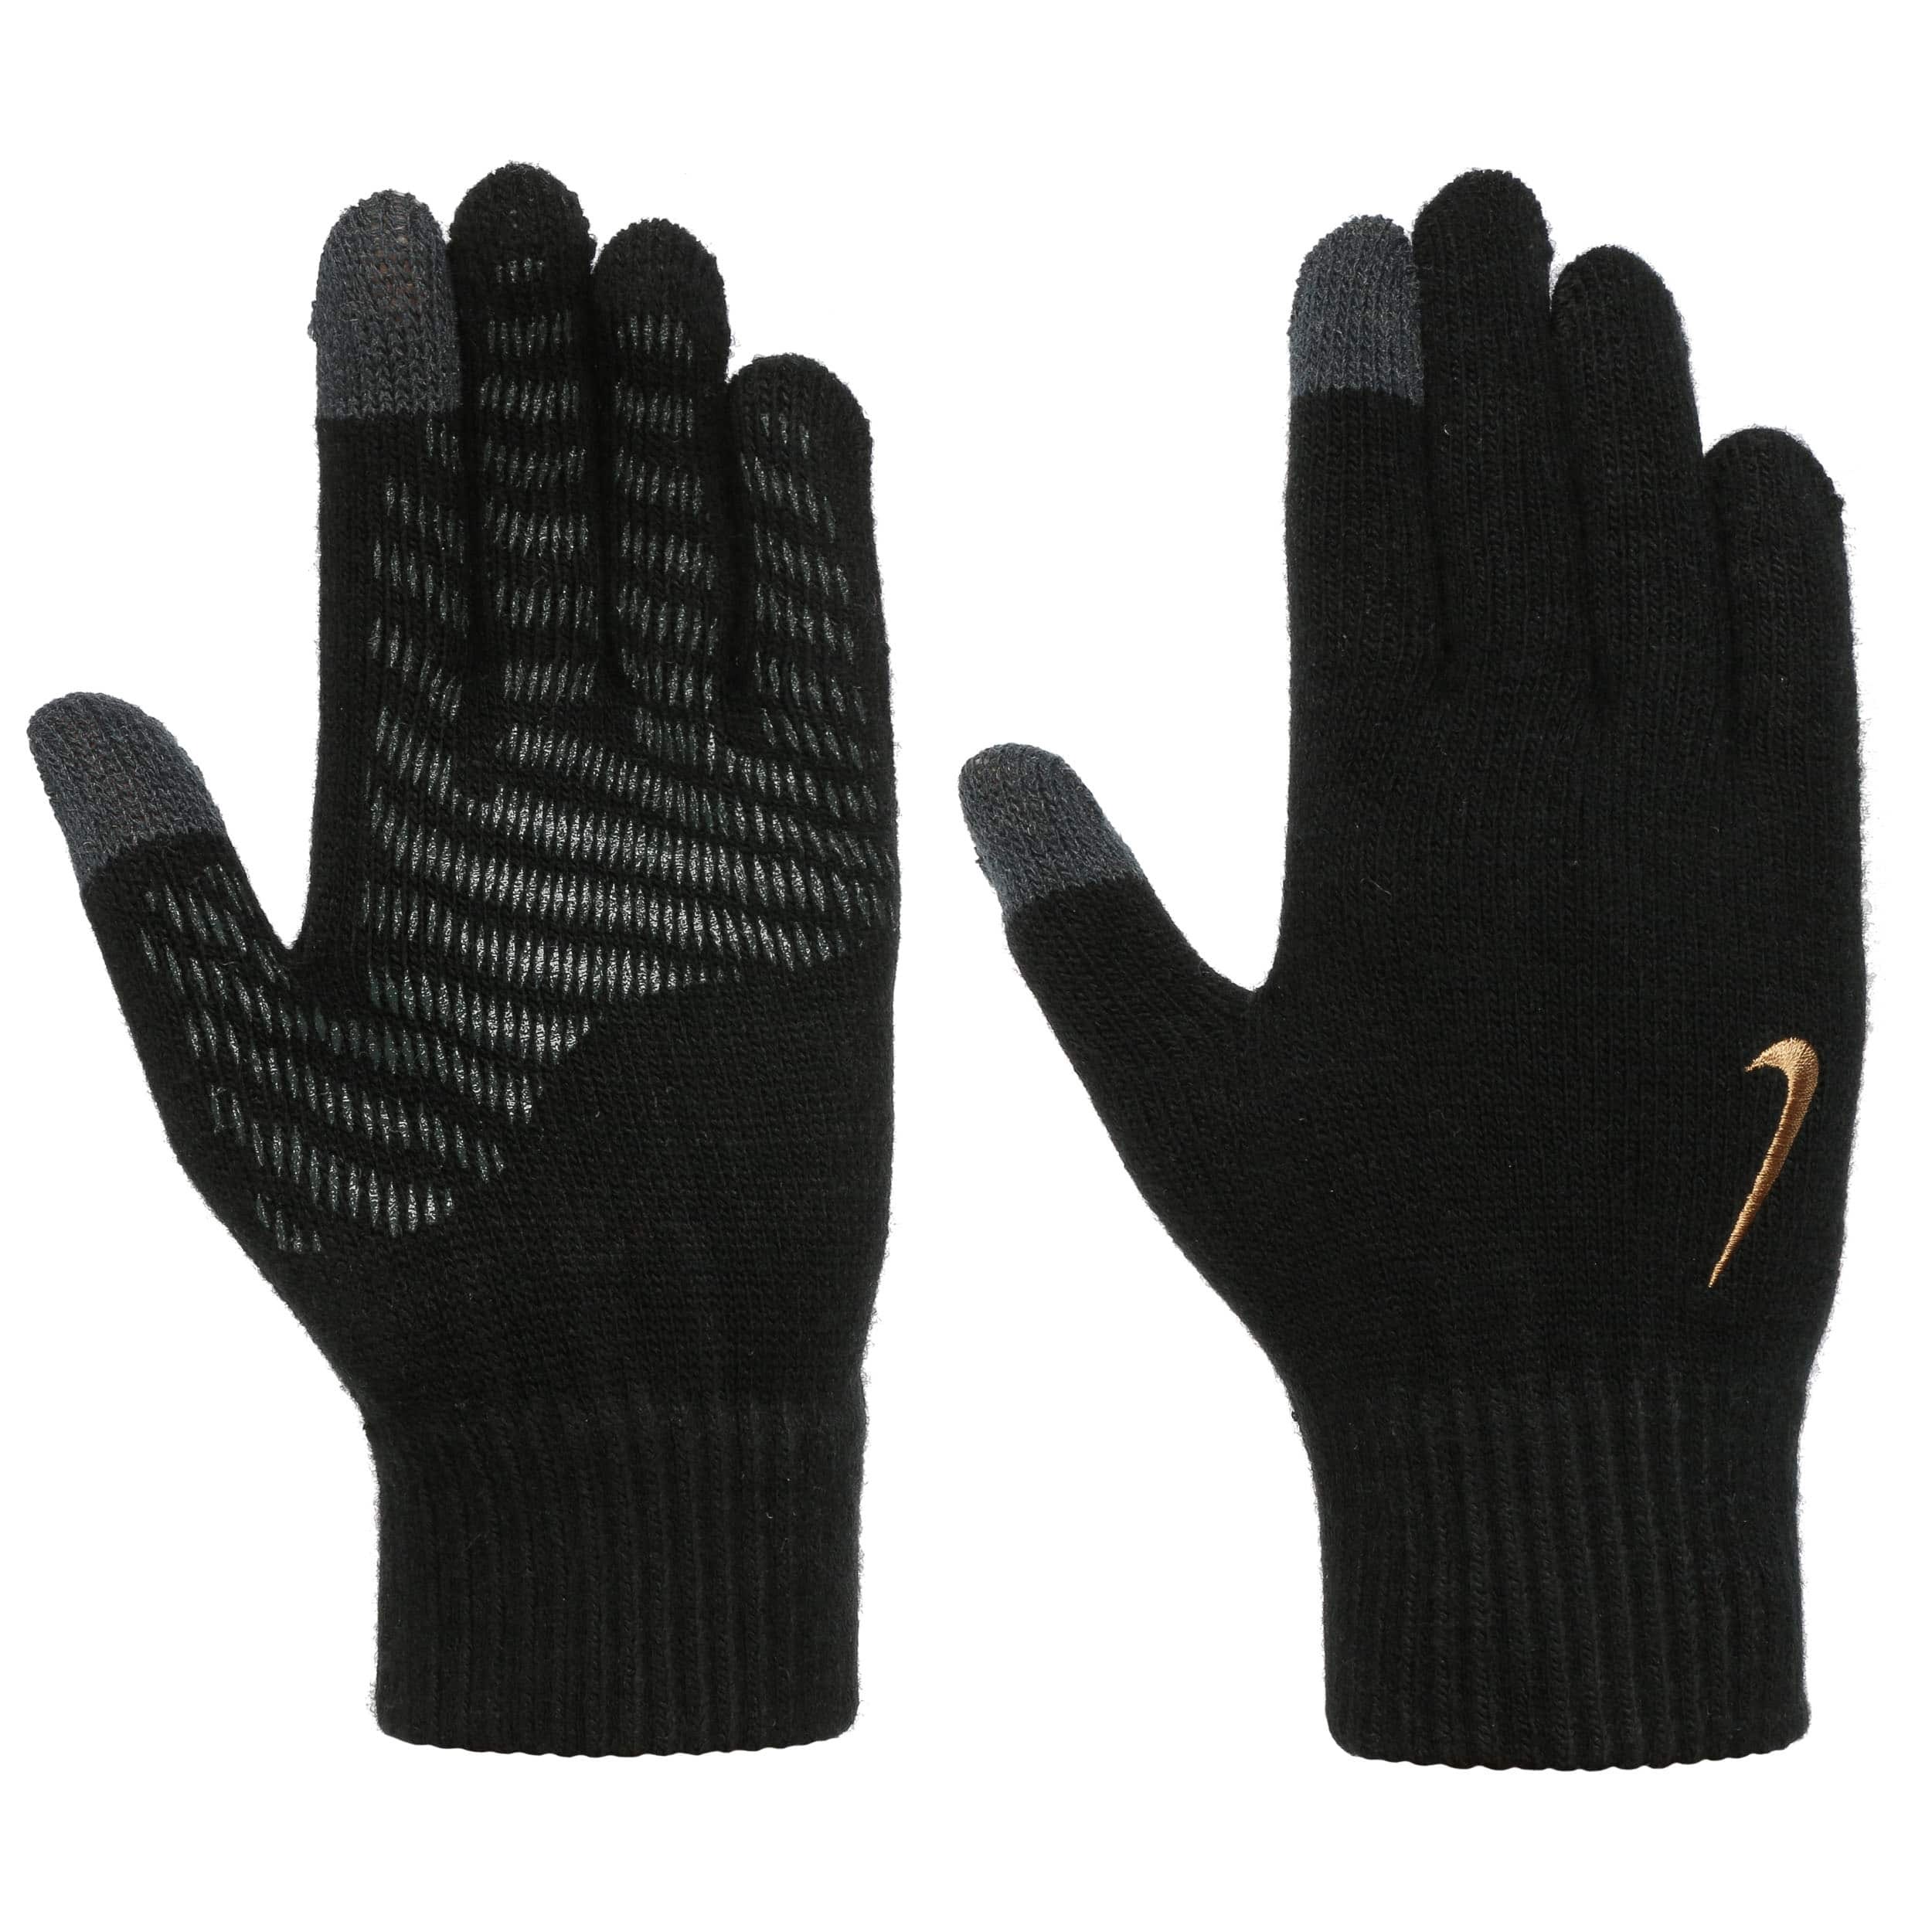 Knitted Tech and Grip Gloves by Nike 